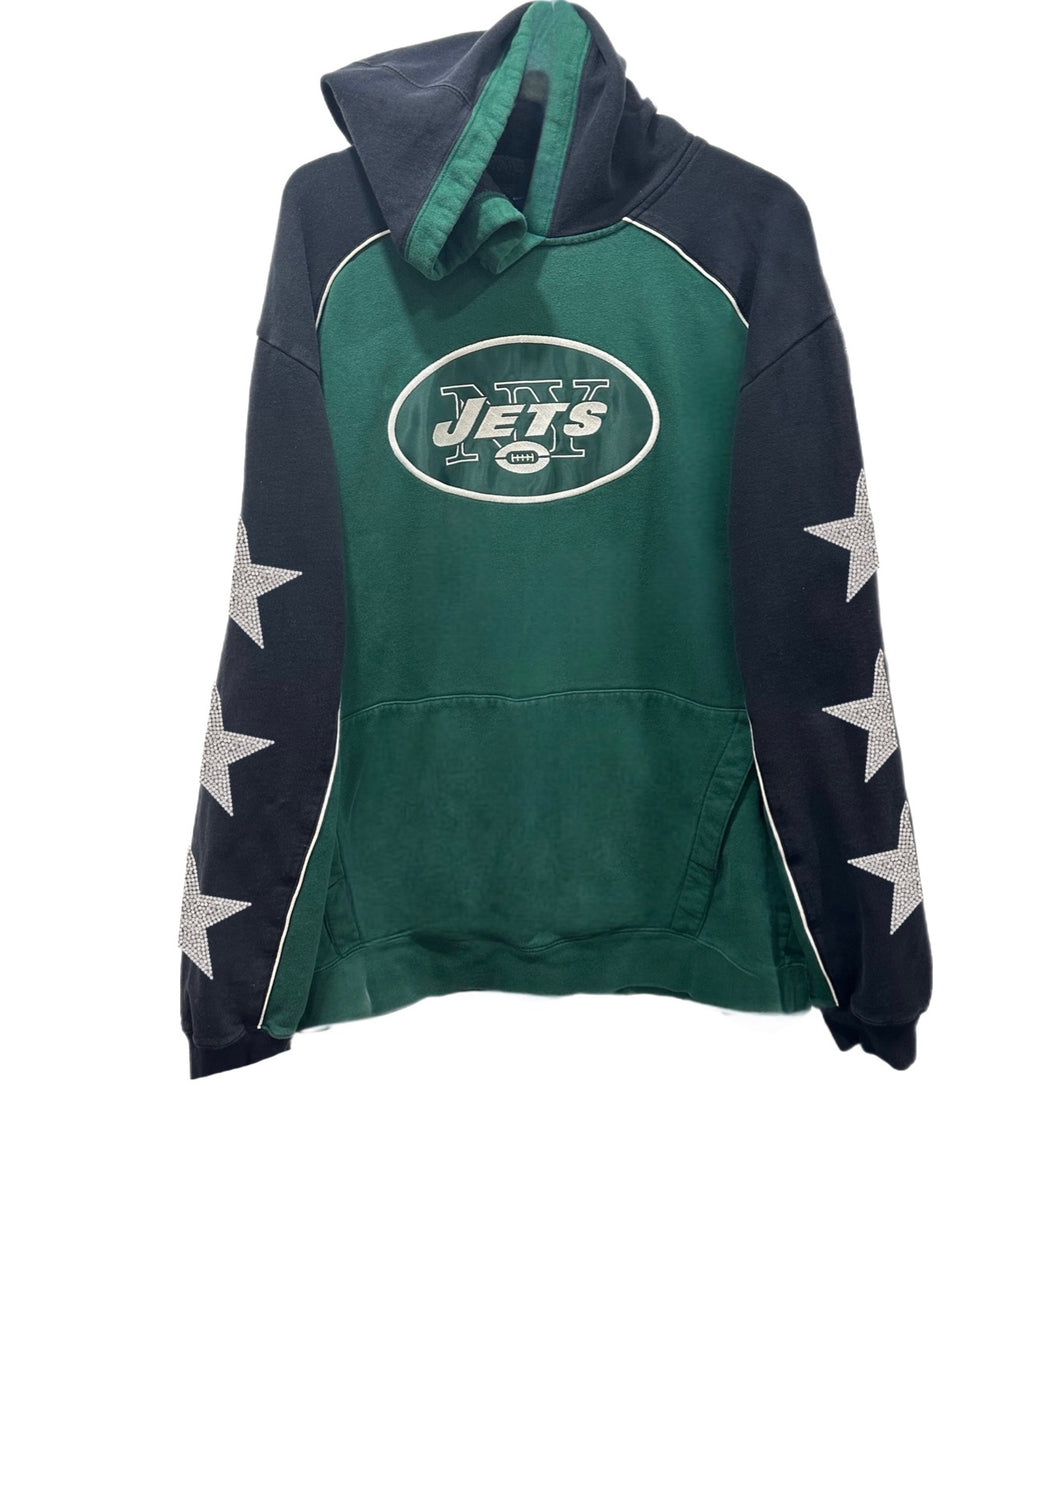 NY Jets, NFL One of a KIND Vintage Hoodie with Three Crystal Star Design